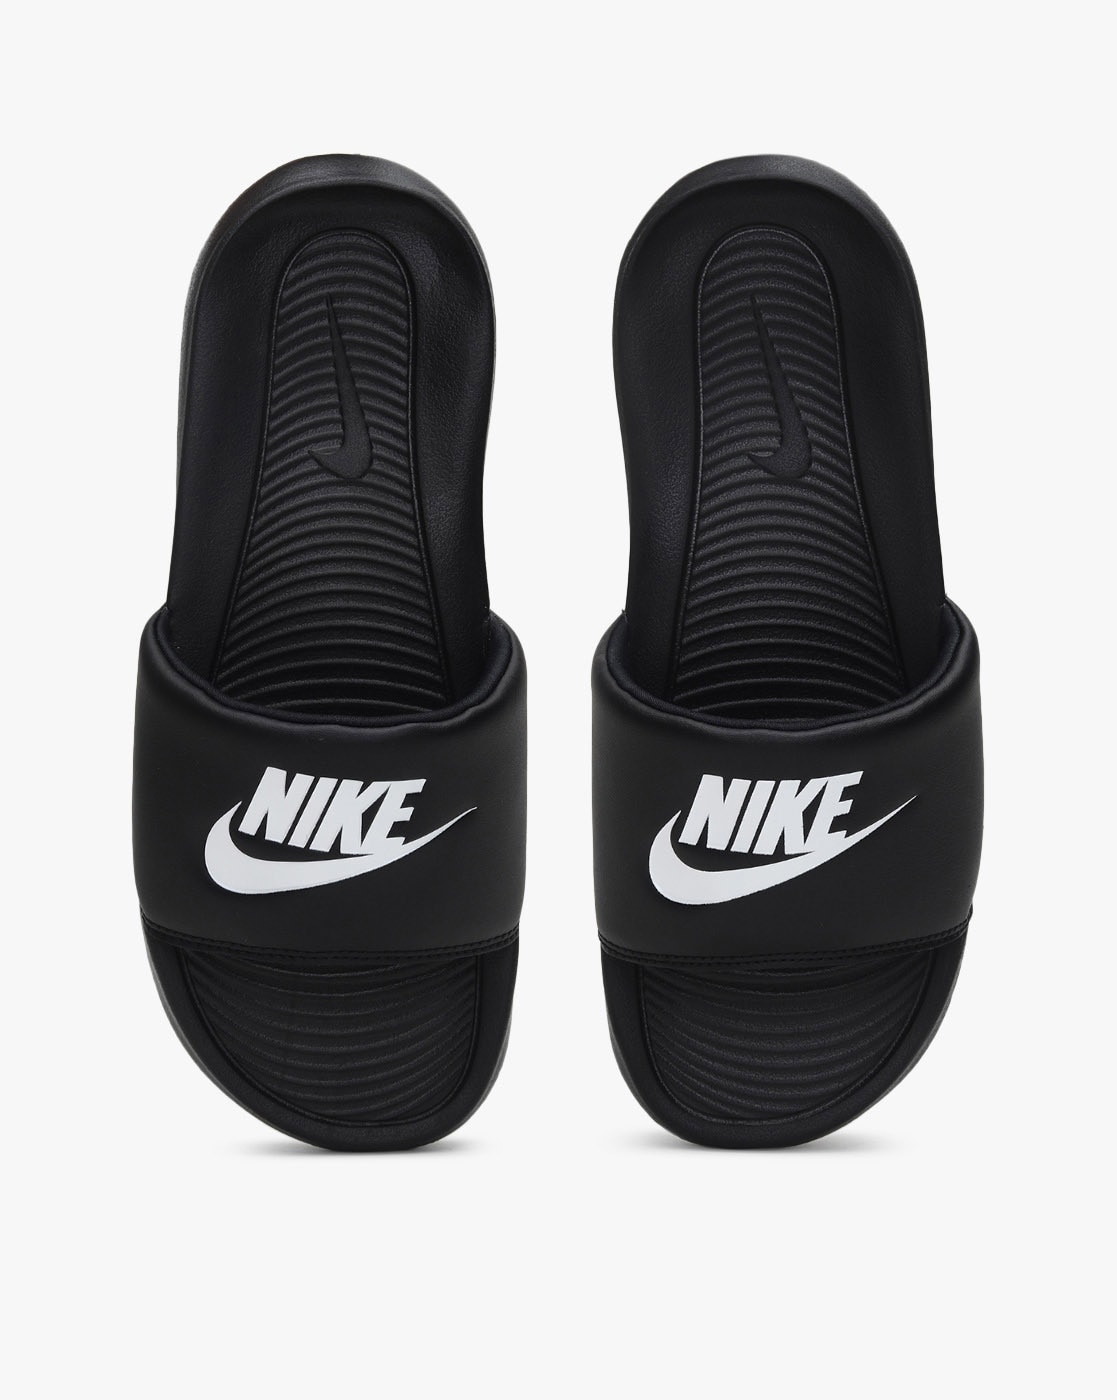 Shop nike slippers for Sale on Shopee Philippines-sgquangbinhtourist.com.vn